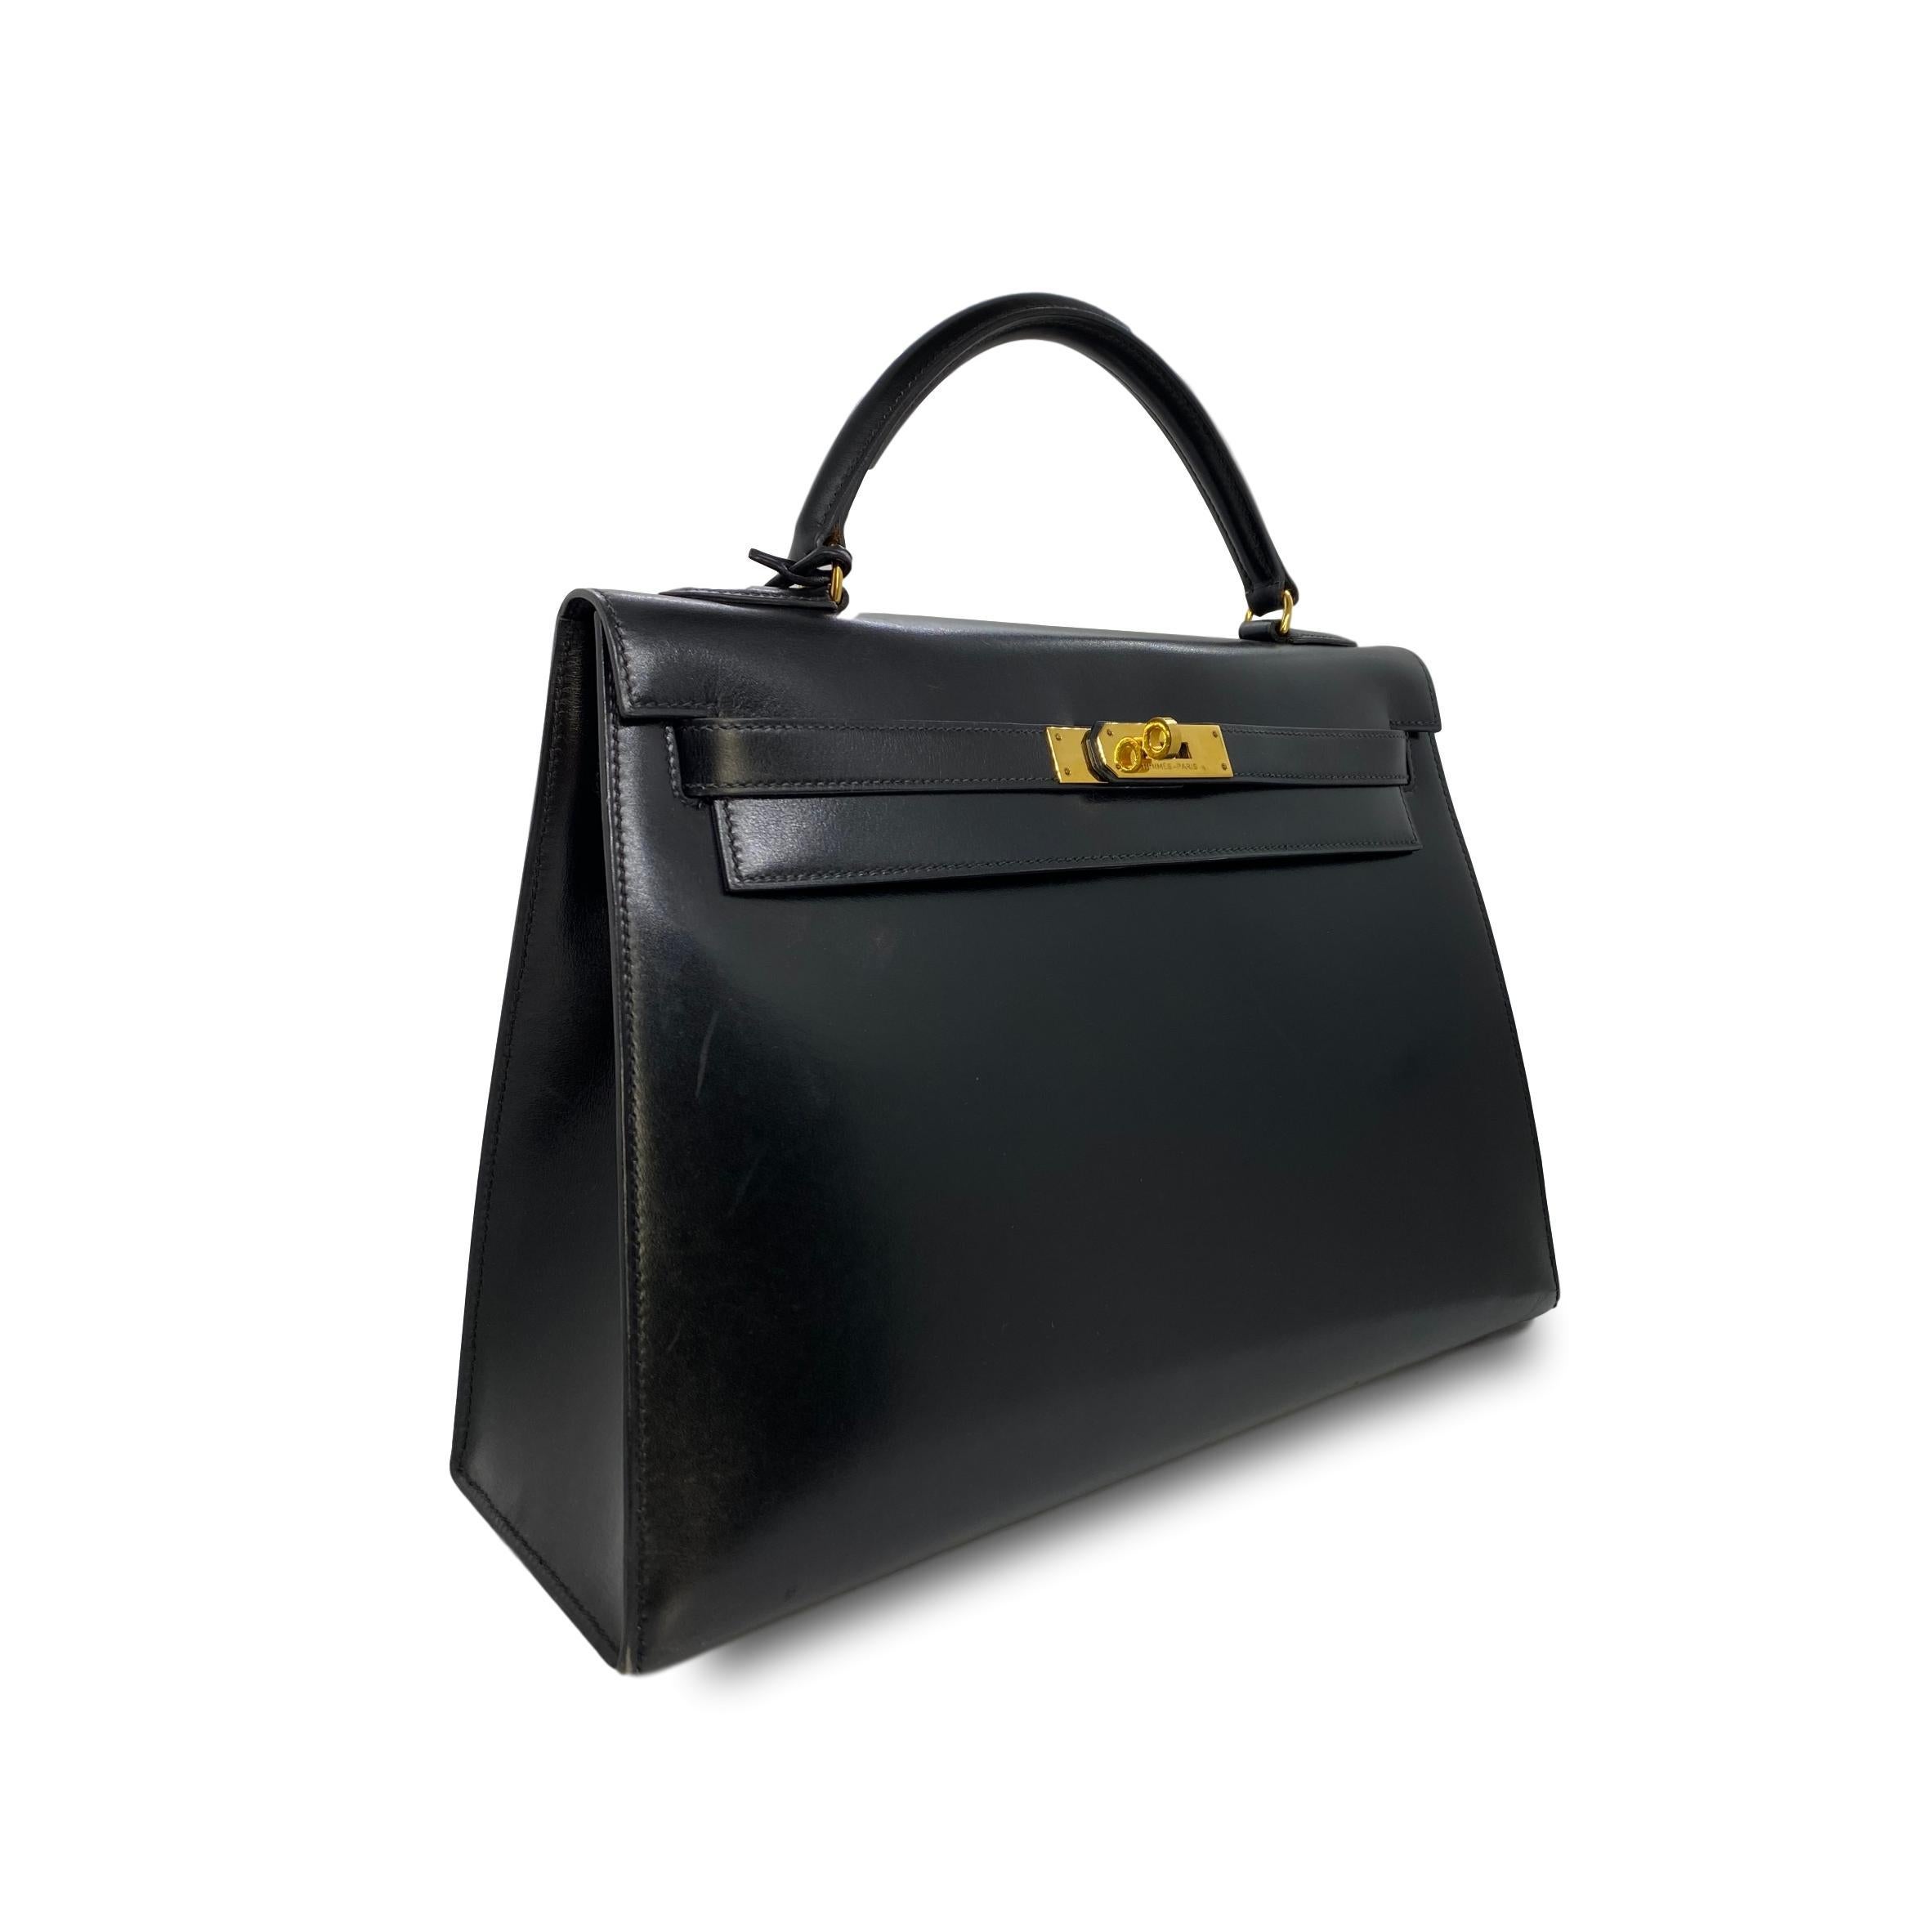 Hermes Vintage Kelly Handbag Noir Black Box Calf with Gold Hardware 32, 1991. Hand crafted in France from premium box calf leather with adorning gold plated hardware. The Hermes Kelly Handbag is an iconic fashion staple, named after Grace Kelly,